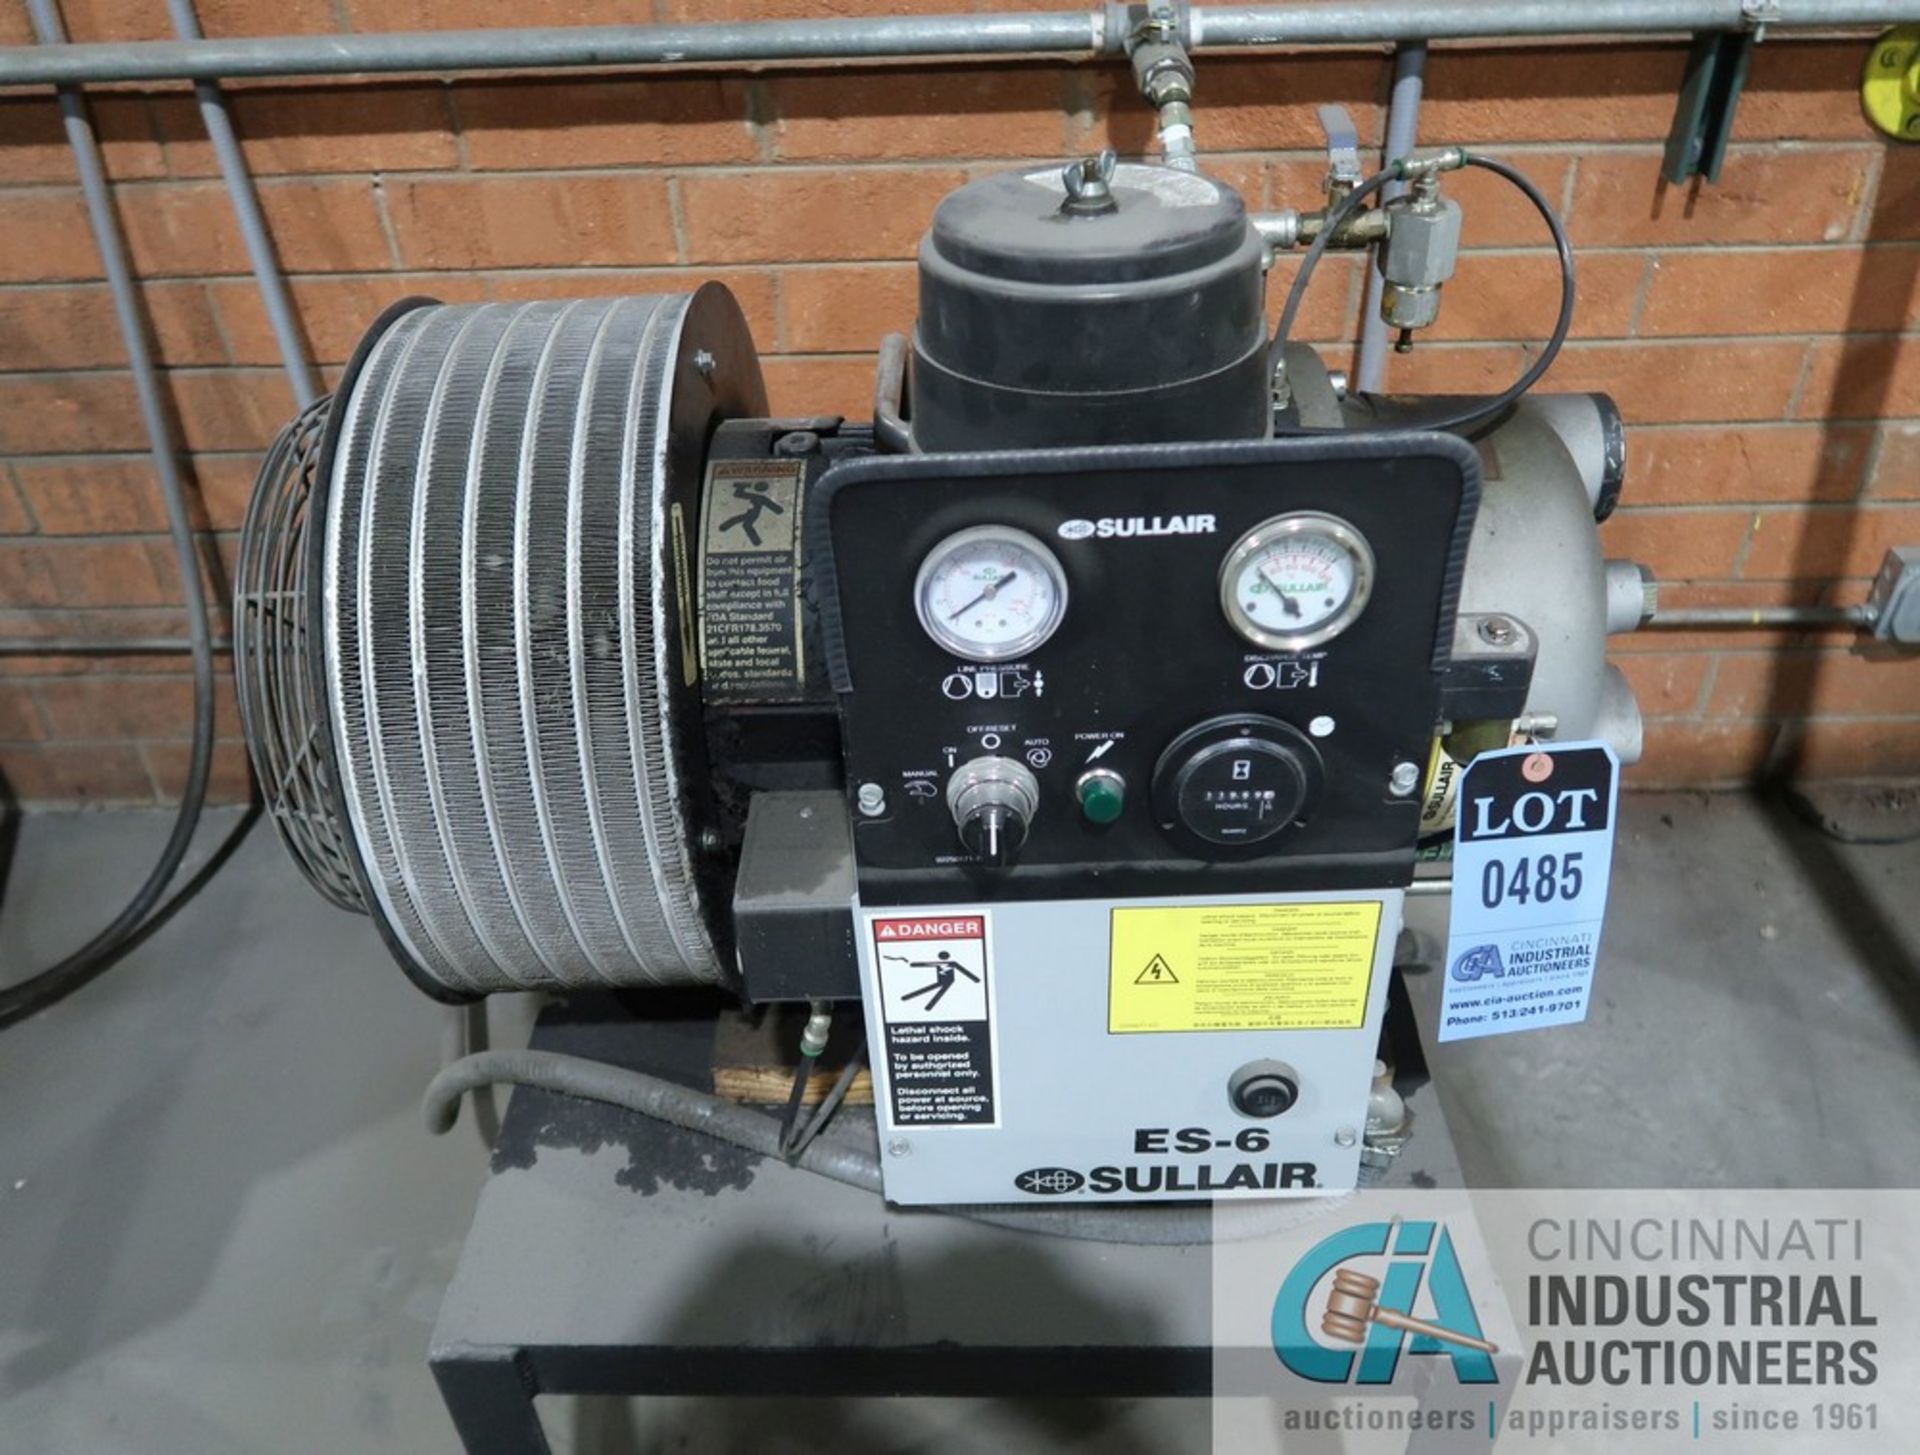 SULLAIR MODEL ES-6 10AC ROTARY SCREW AIR COMPRESSOR; S/N 201705250013, 11,969 HOURS SHOWING **For